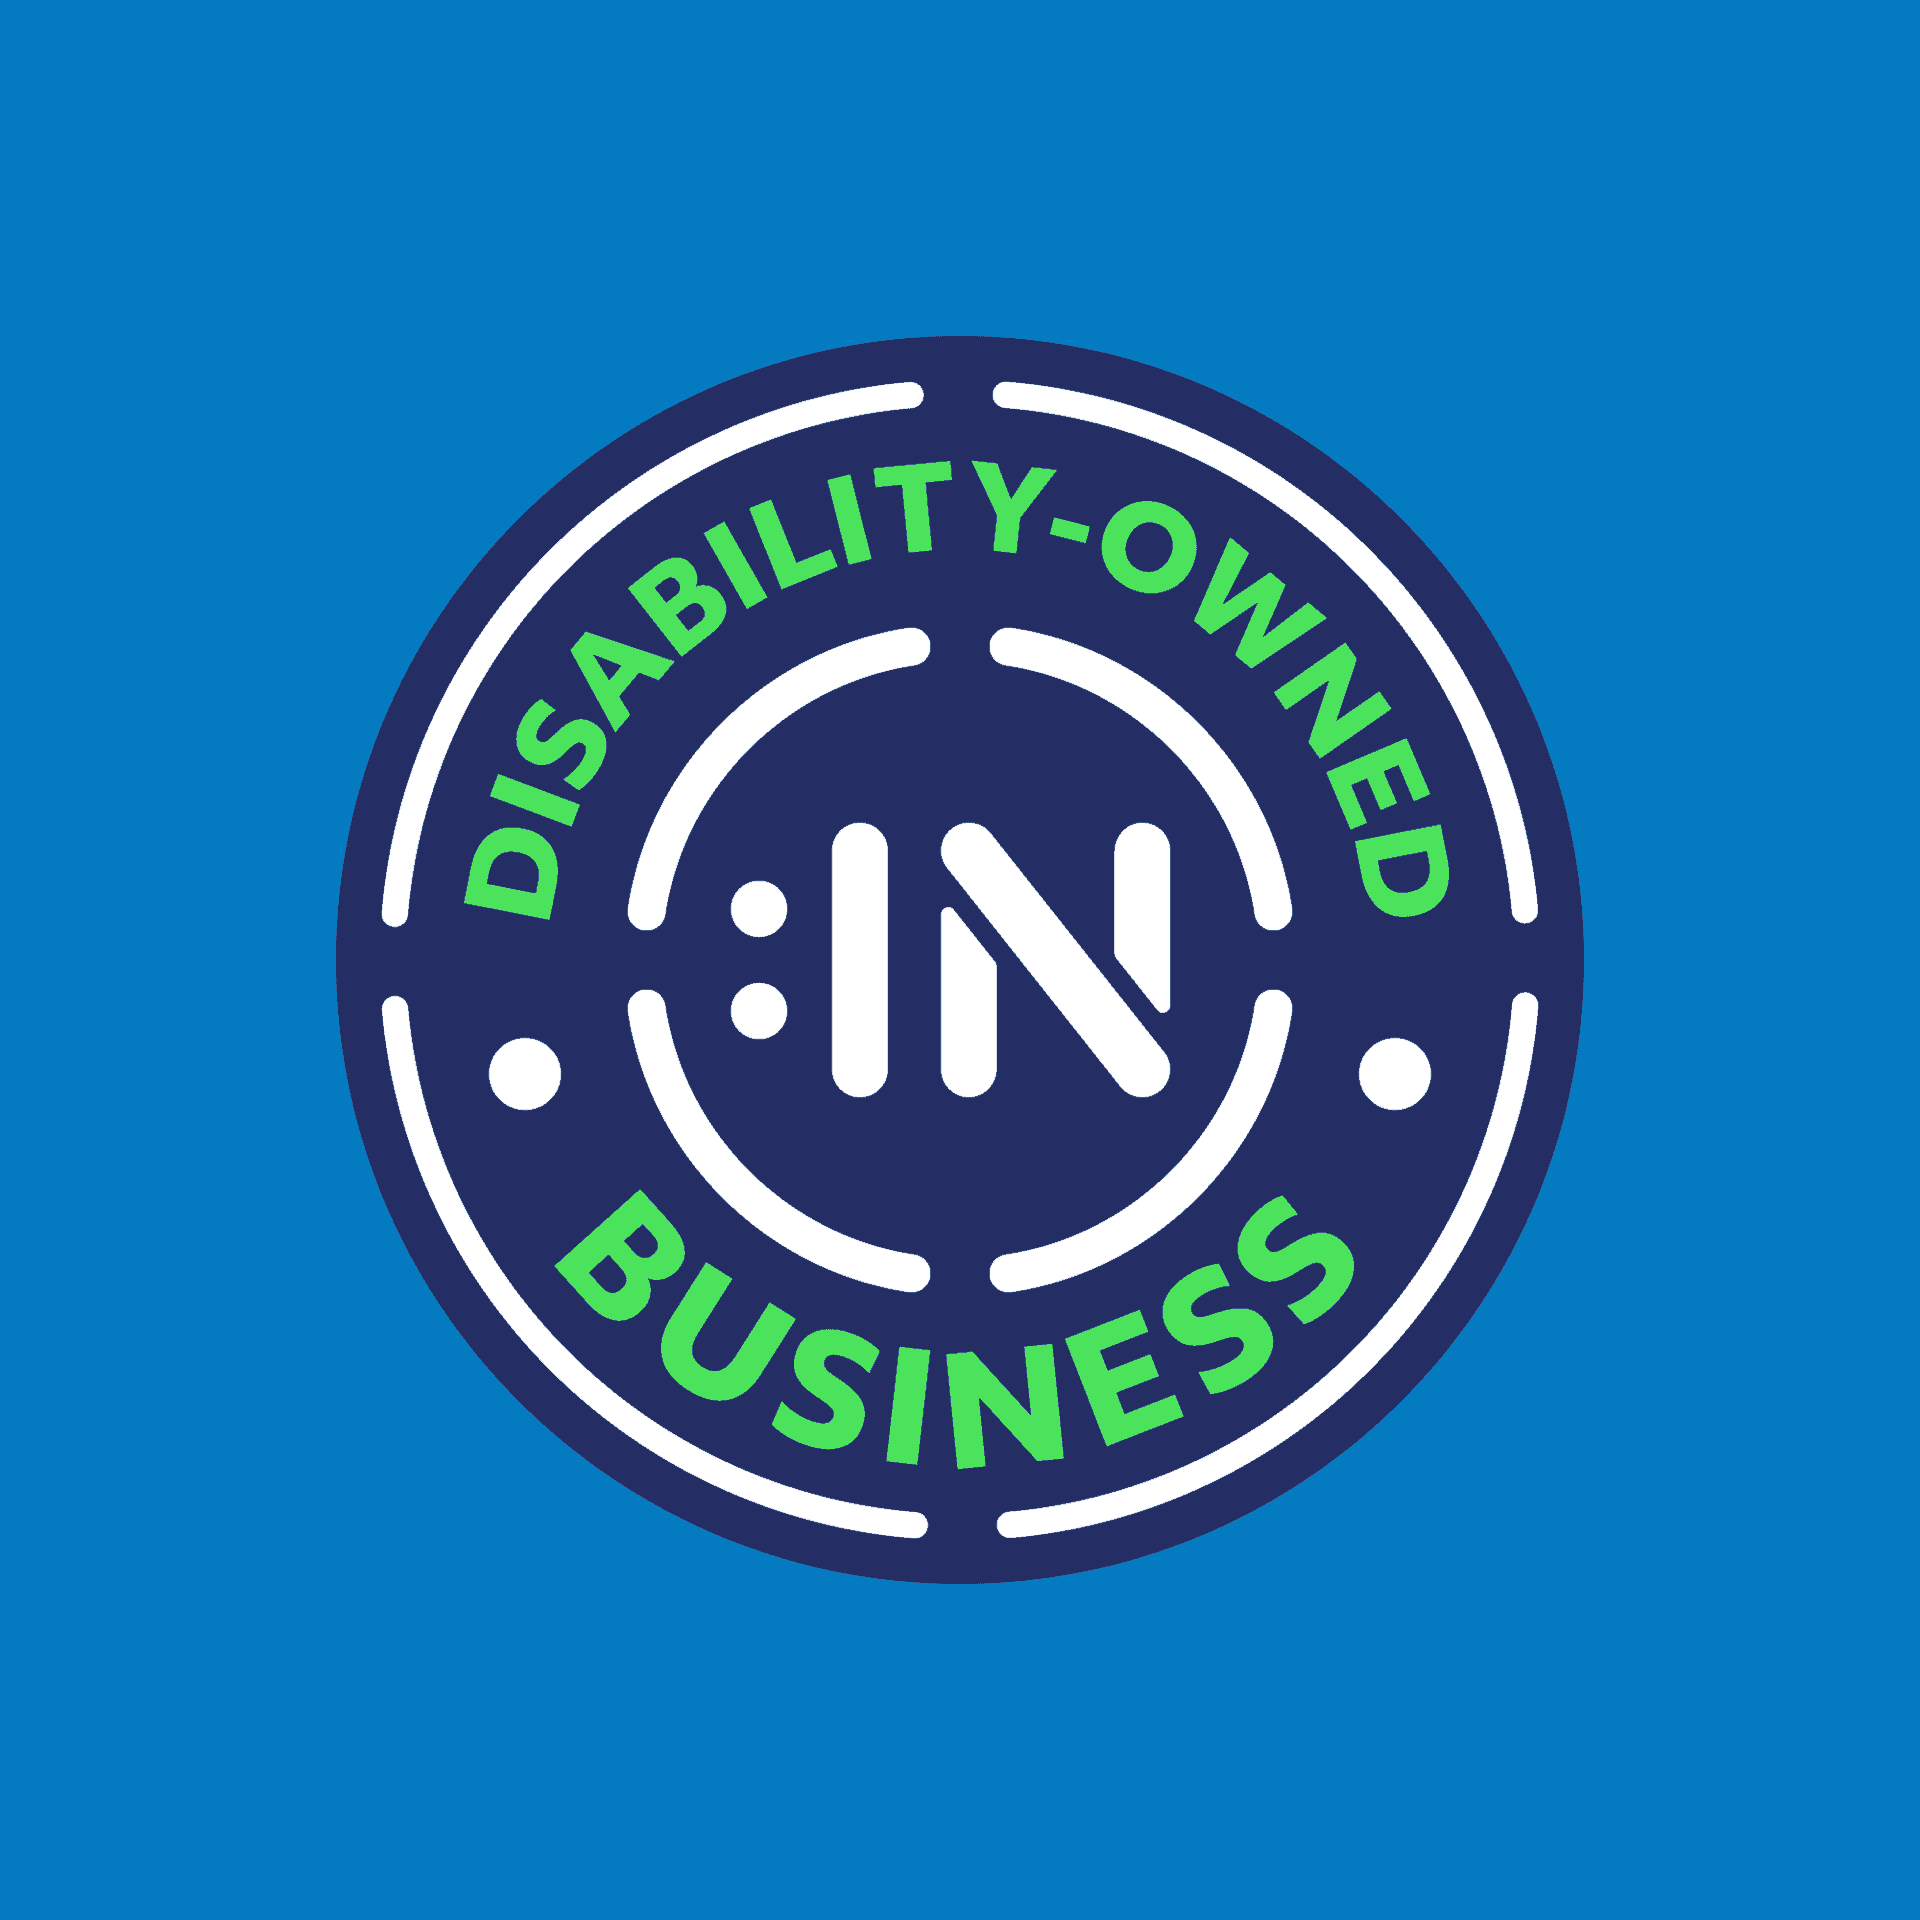 Disability owned business logo.